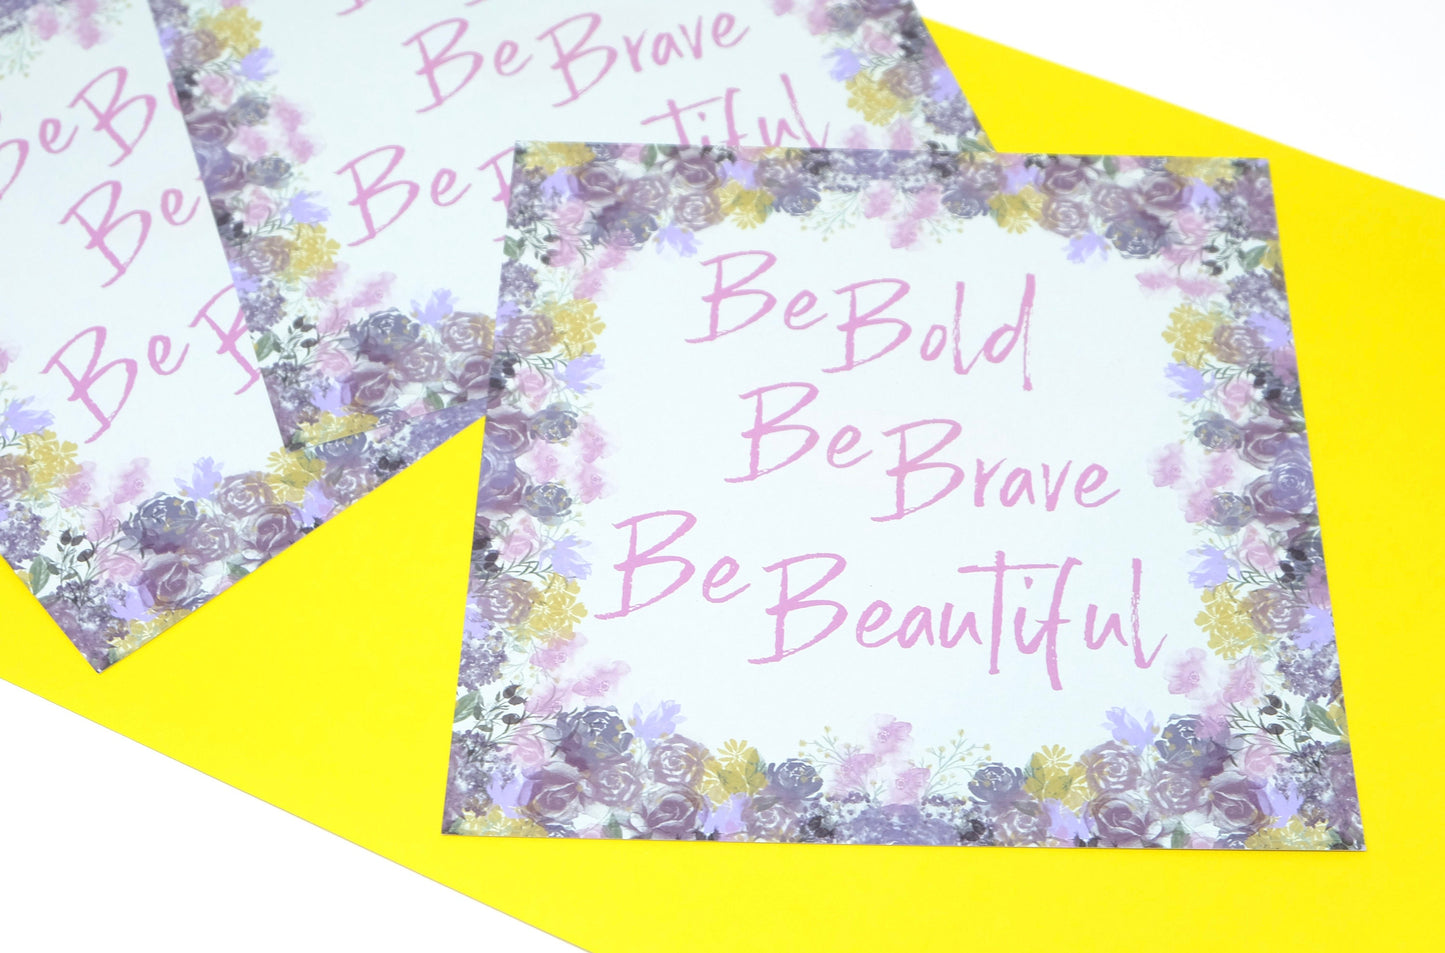 Be Bold, Be Brave, Be Beautiful Digital Art Print - Empowering Affirmation Art Print With Floral Illustration